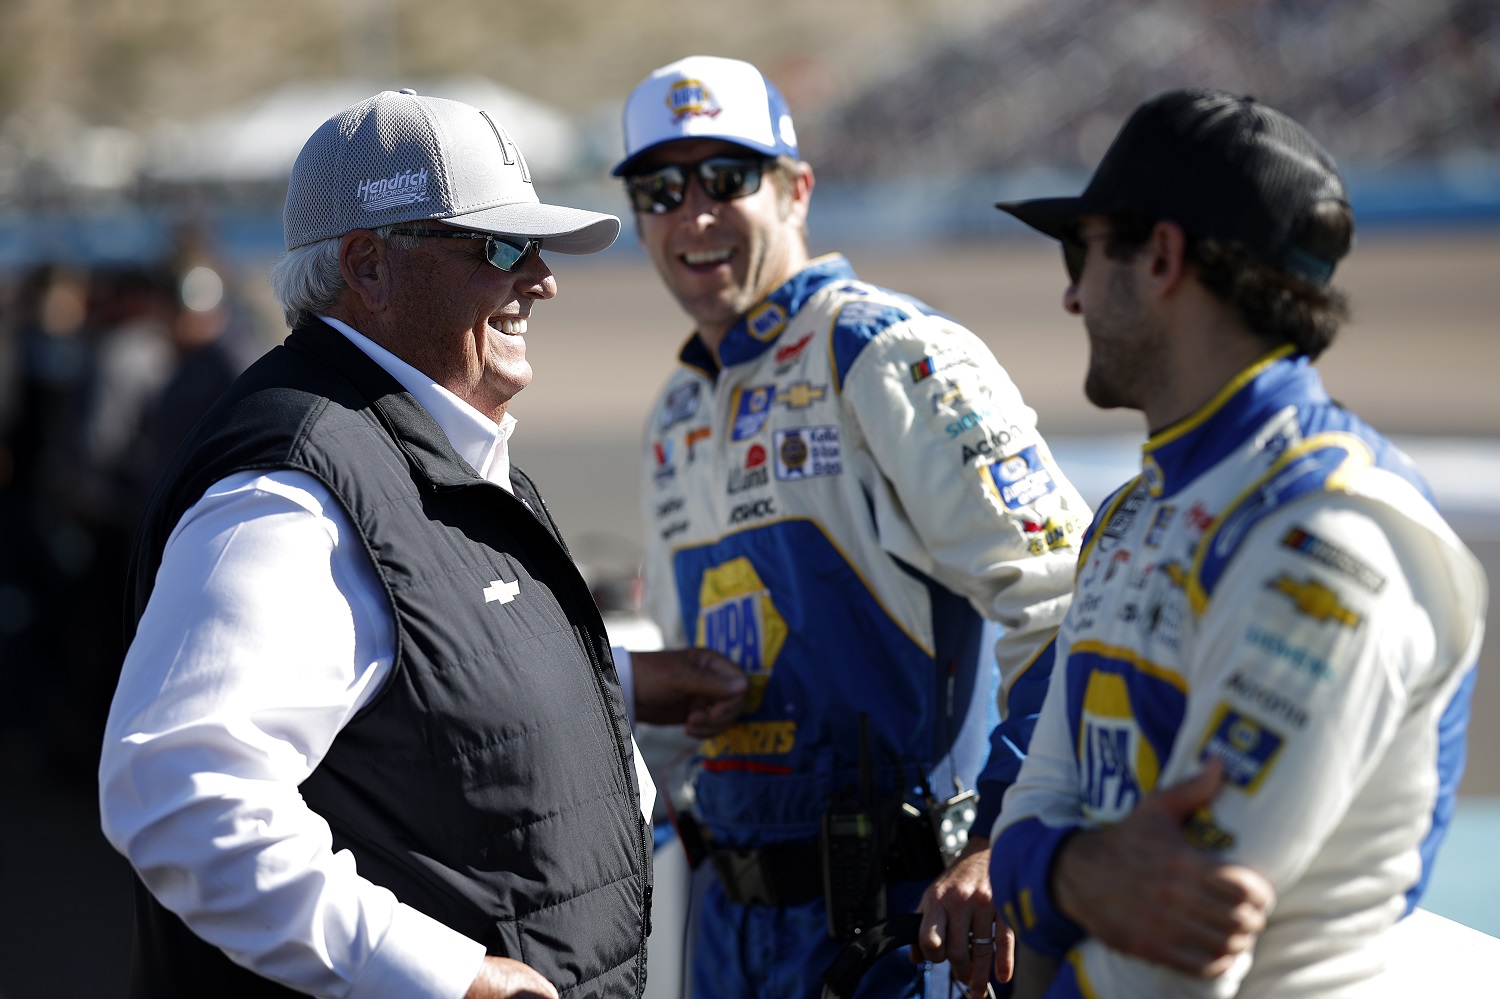 NASCAR Hall of Famer and HMS team owner Rick Hendrick spends time with crew chief Alan Gustafson and Chase Elliott on the grid prior to the NASCAR Cup Series Championship at Phoenix Raceway on Nov. 6, 2022.